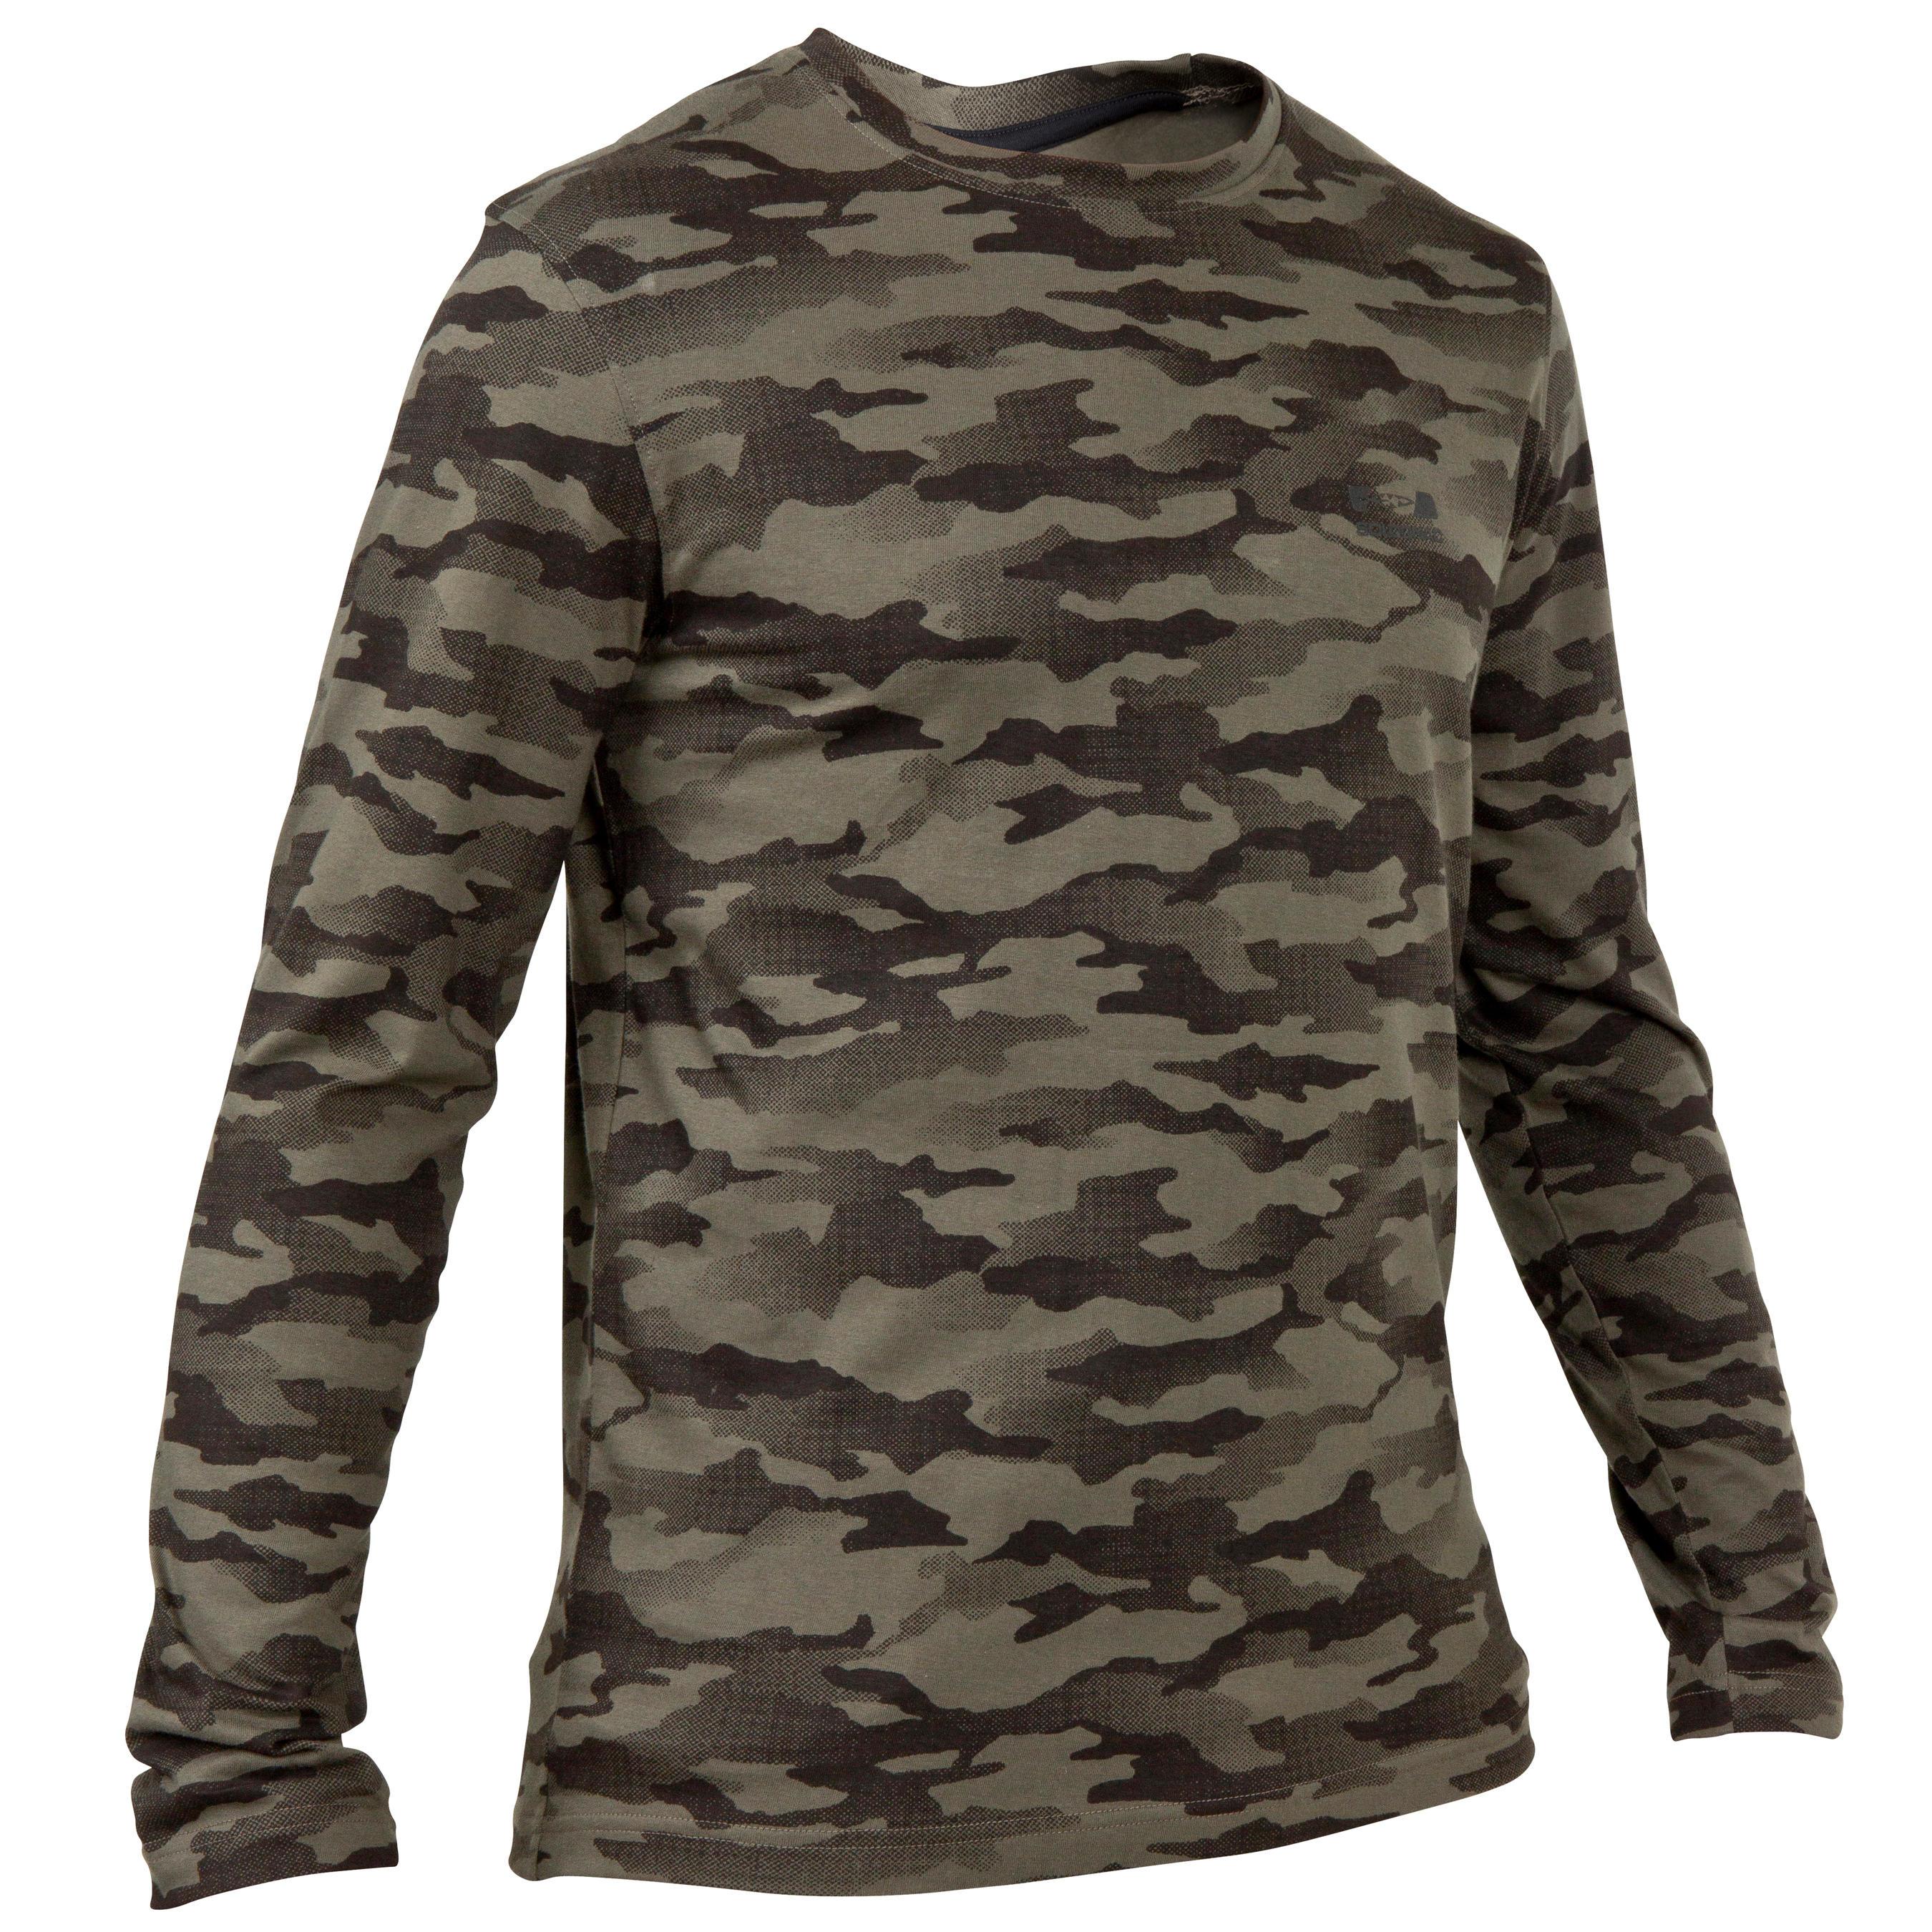 camouflage t shirt online india